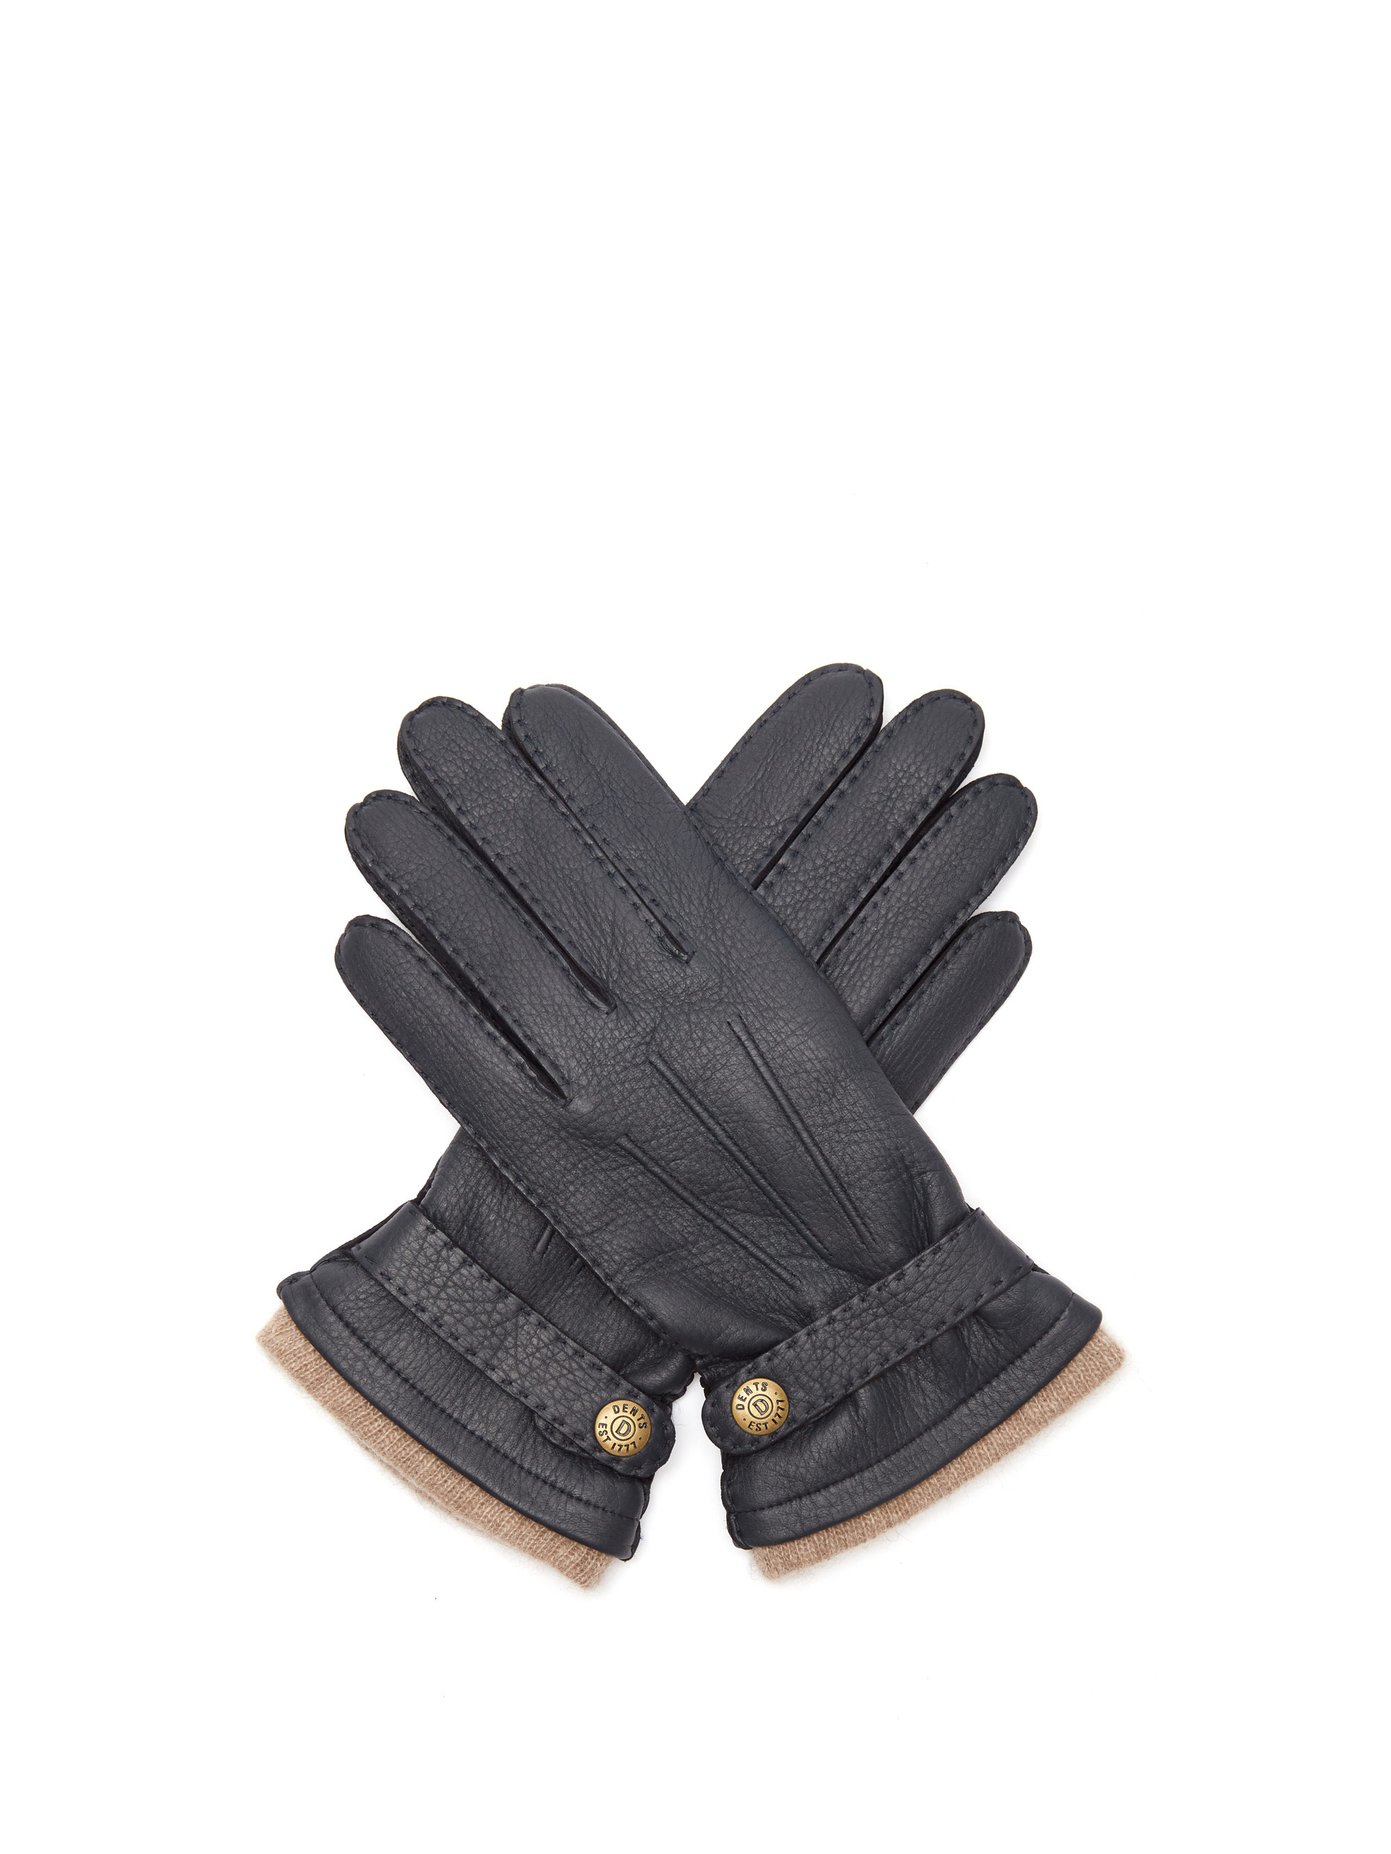 dents leather gloves